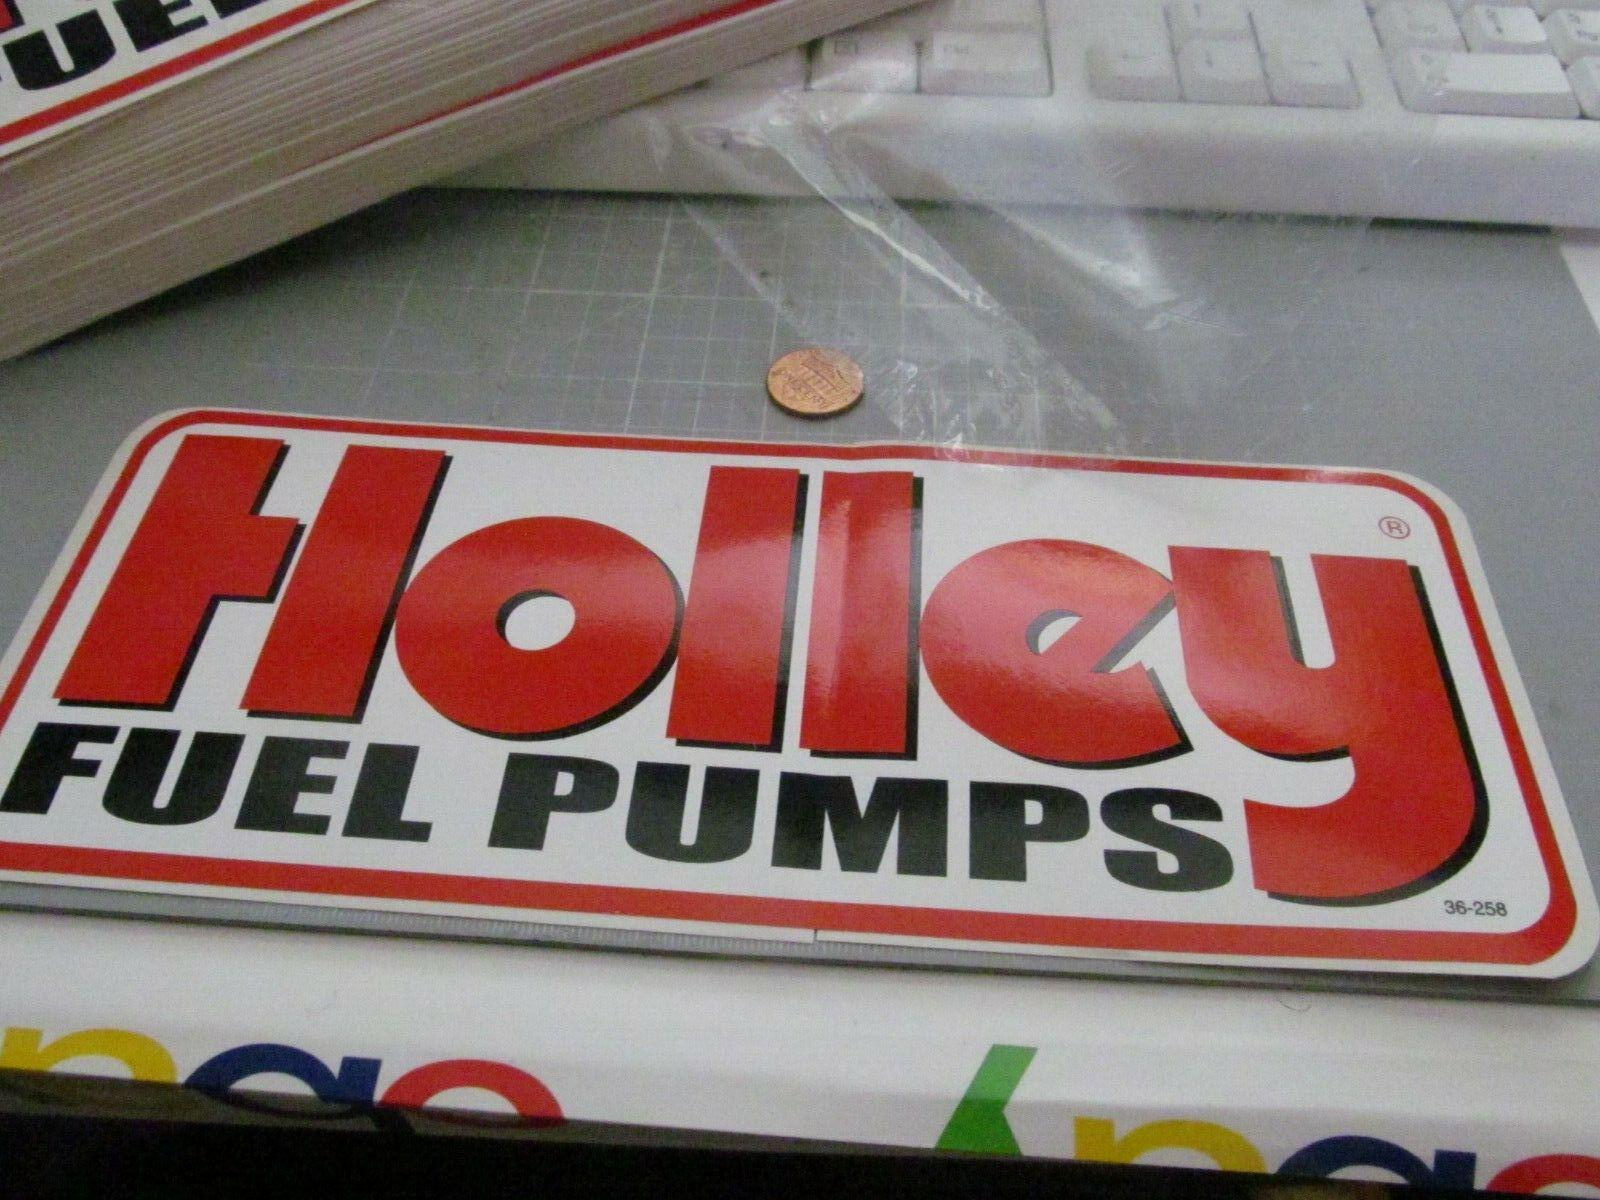 HOLLEY FUEL PUMPS Sticker / Decal ORIGINAL OLD STOCK